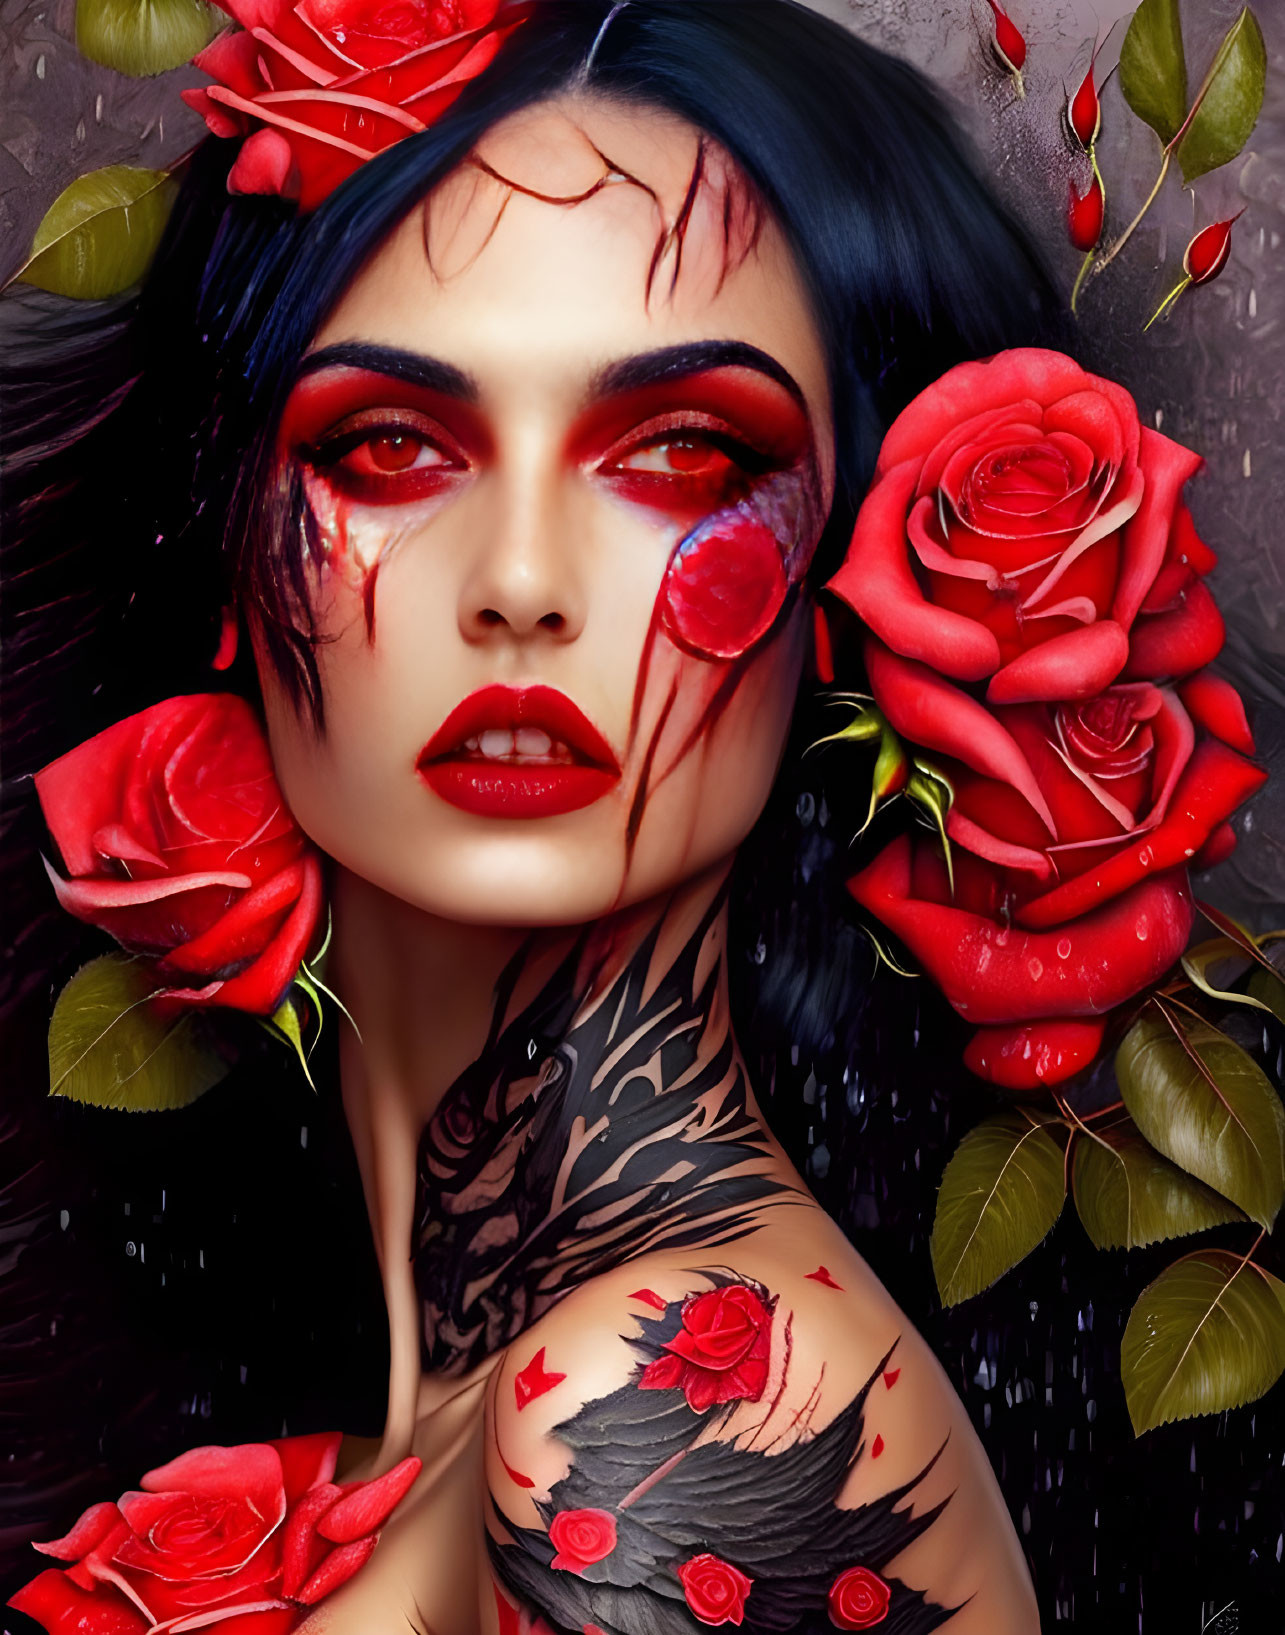 Raven-Haired Woman with Intense Makeup, Red Roses, and Bird Tattoo